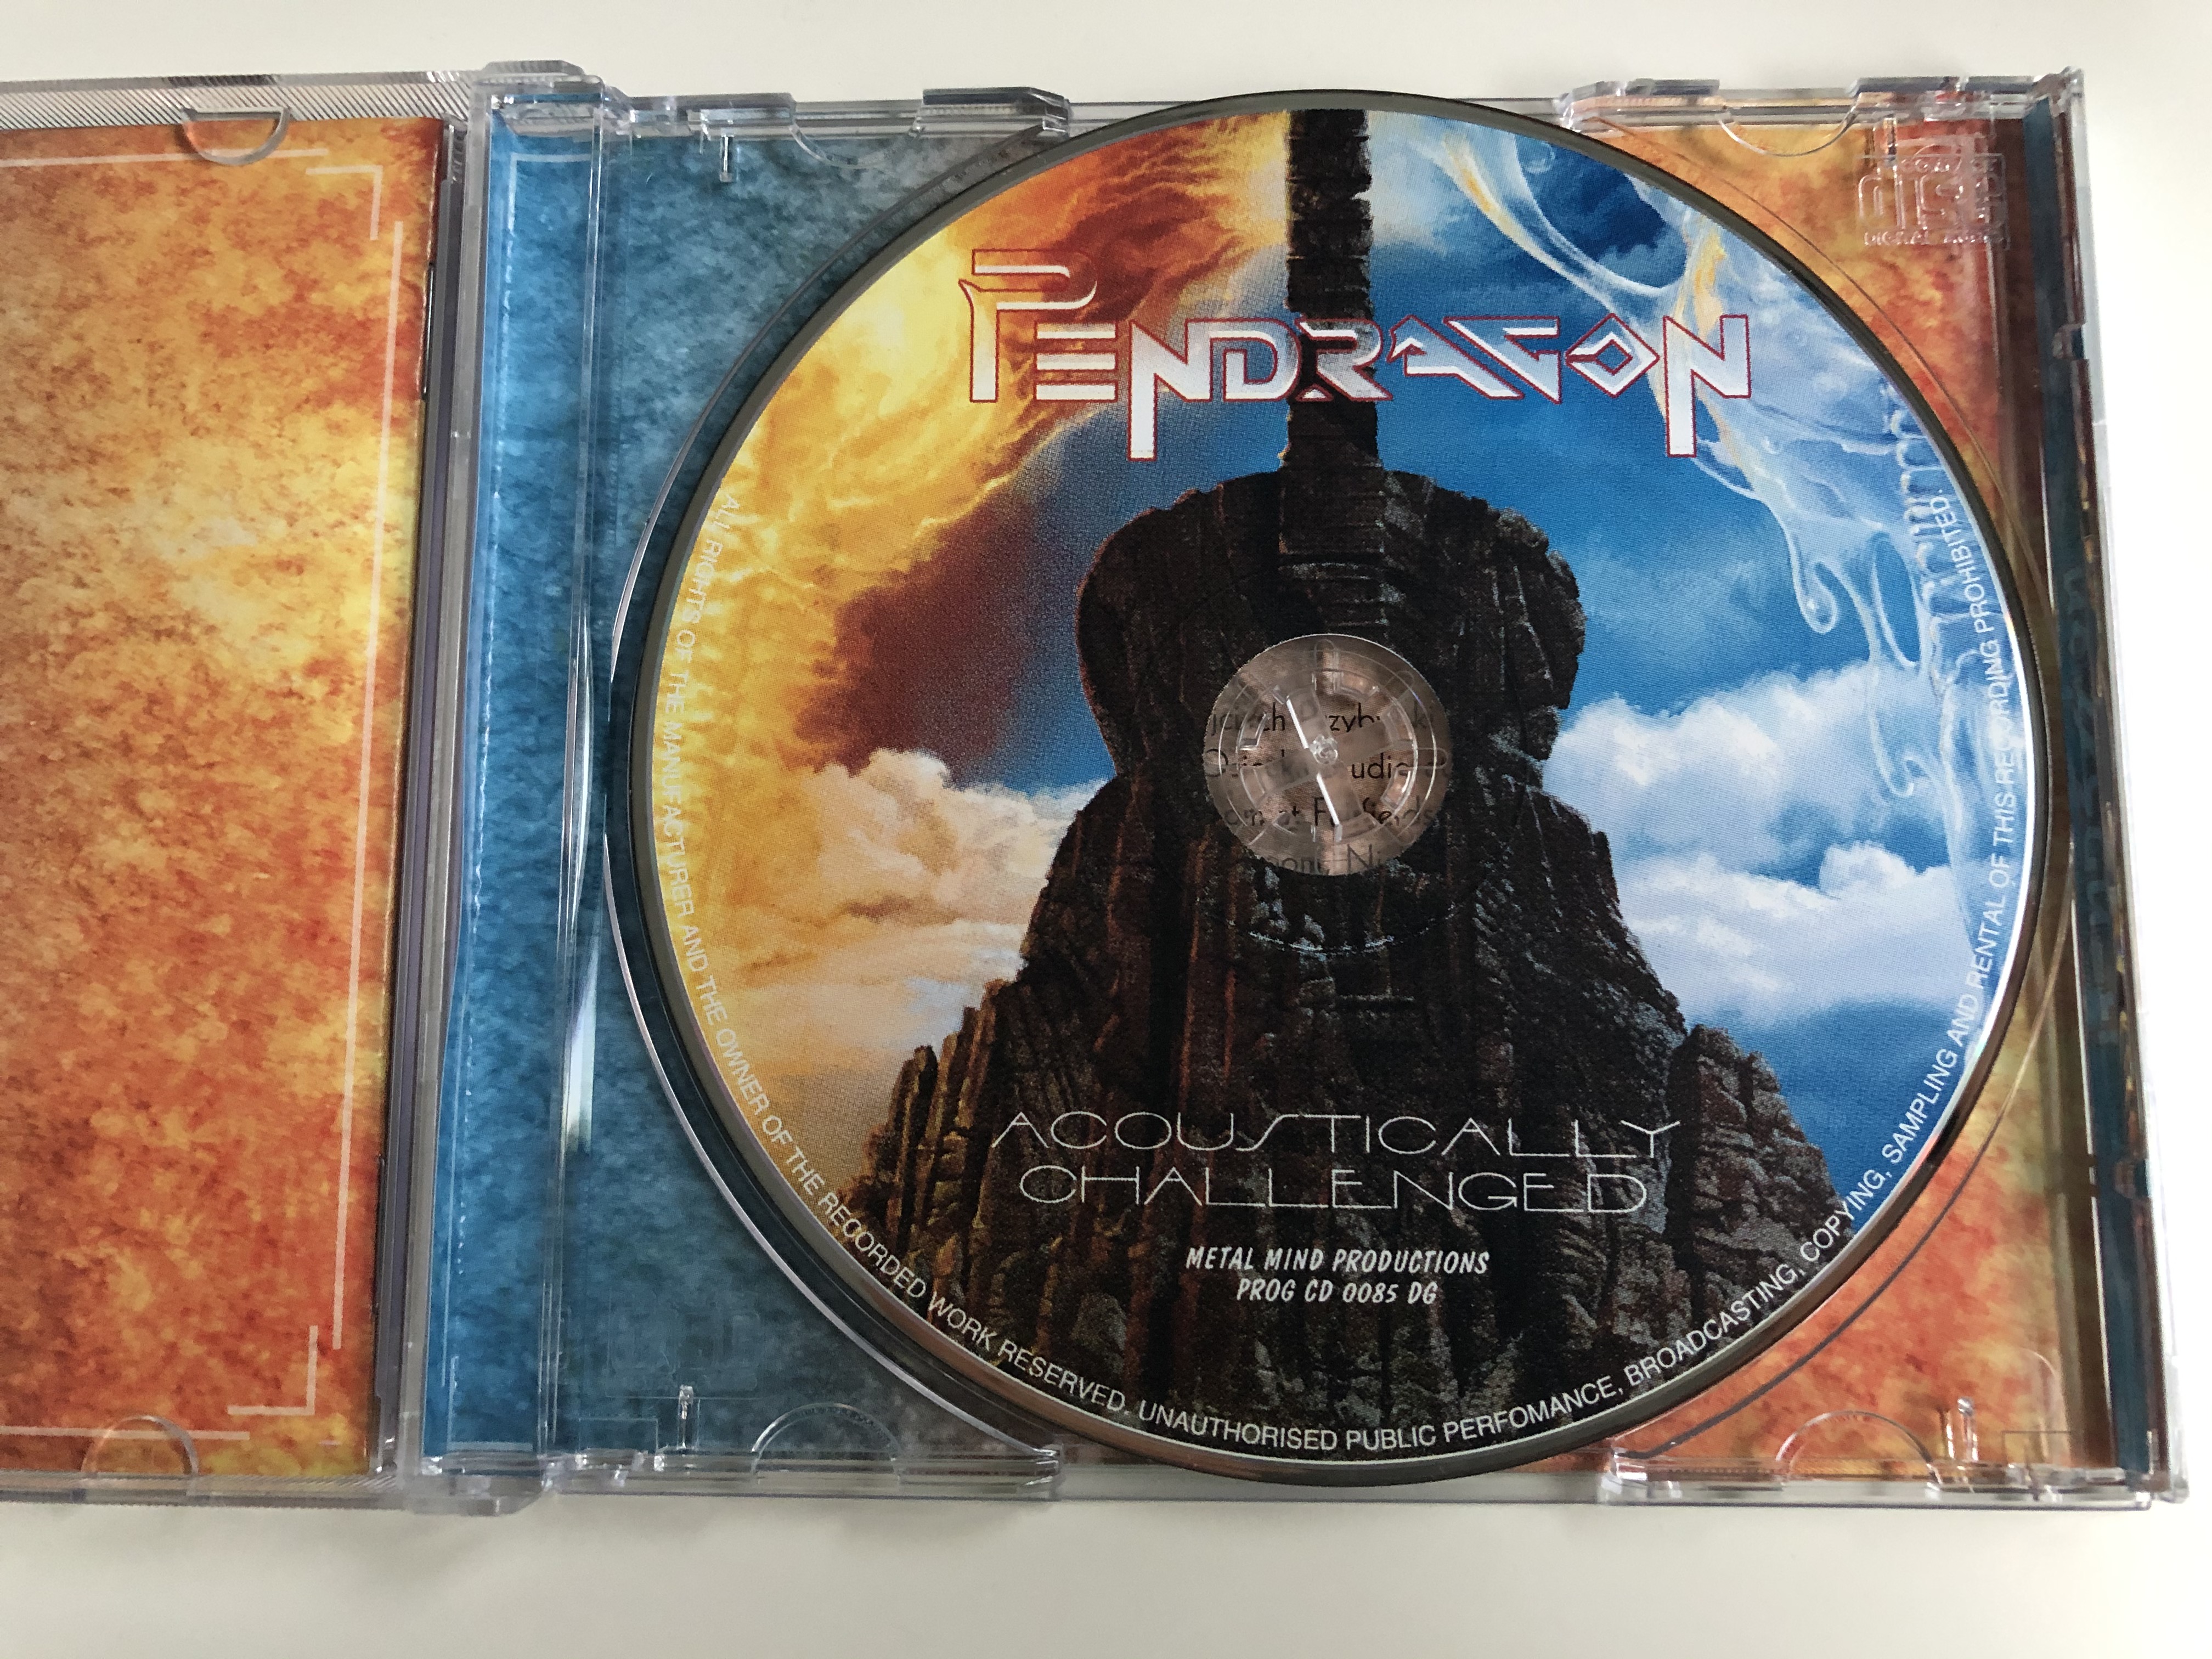 pendragon-acoustically-challenged-metal-mind-records-audio-cd-2002-prog-cd-0085-dg-7-.jpg